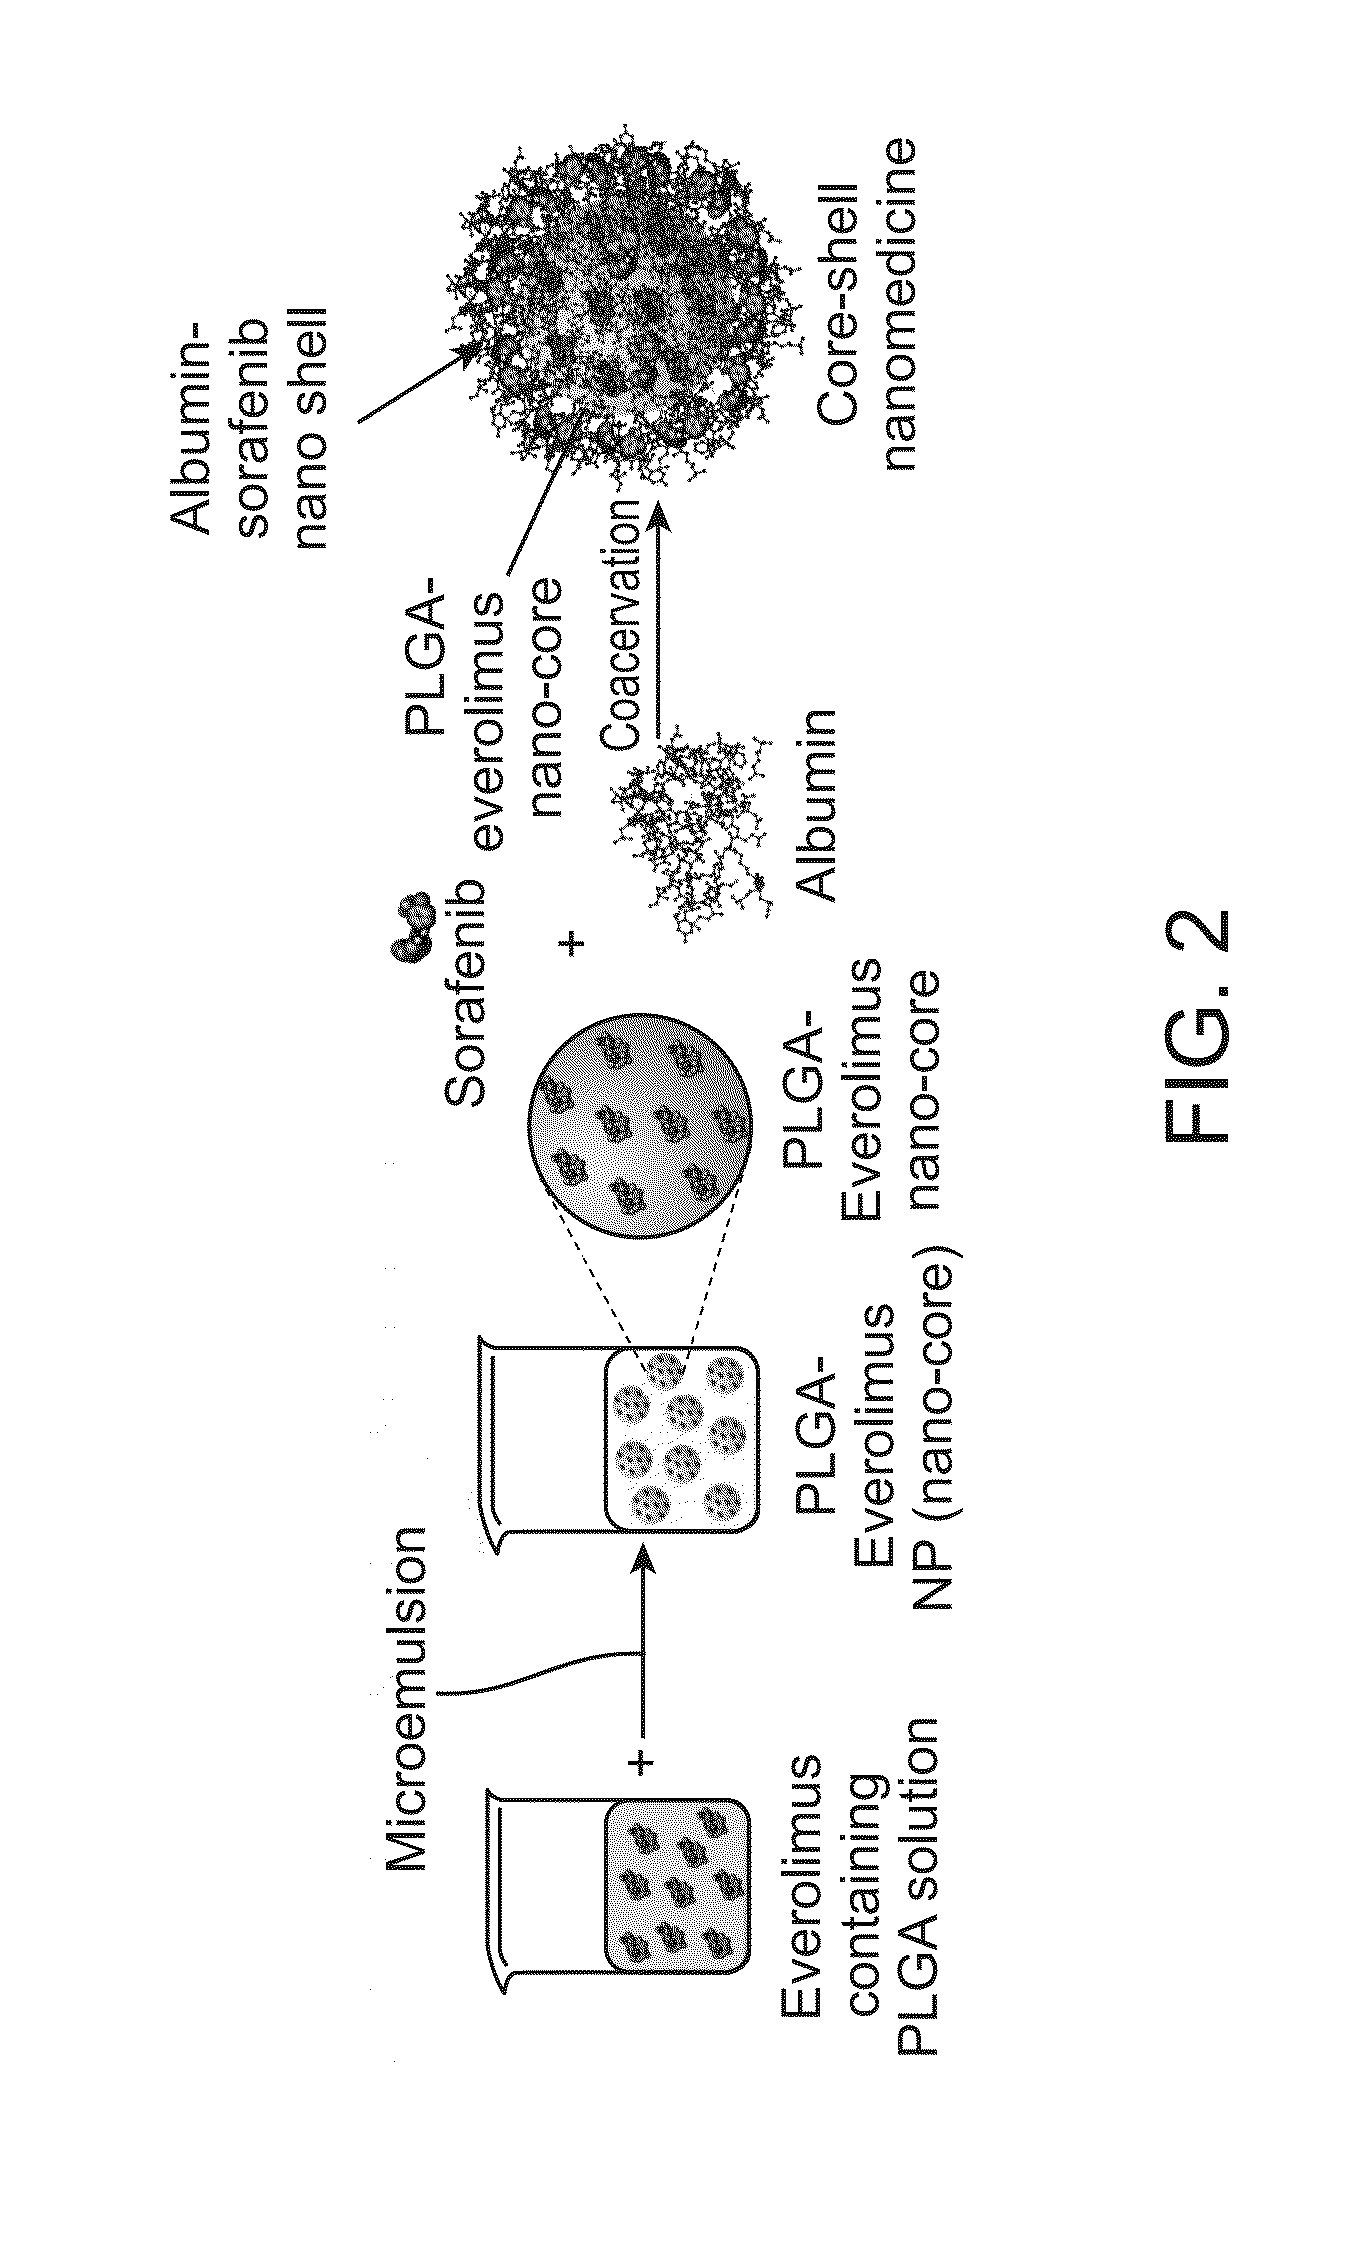 Core-shell particle formulation for delivering multiple therapeutic agents